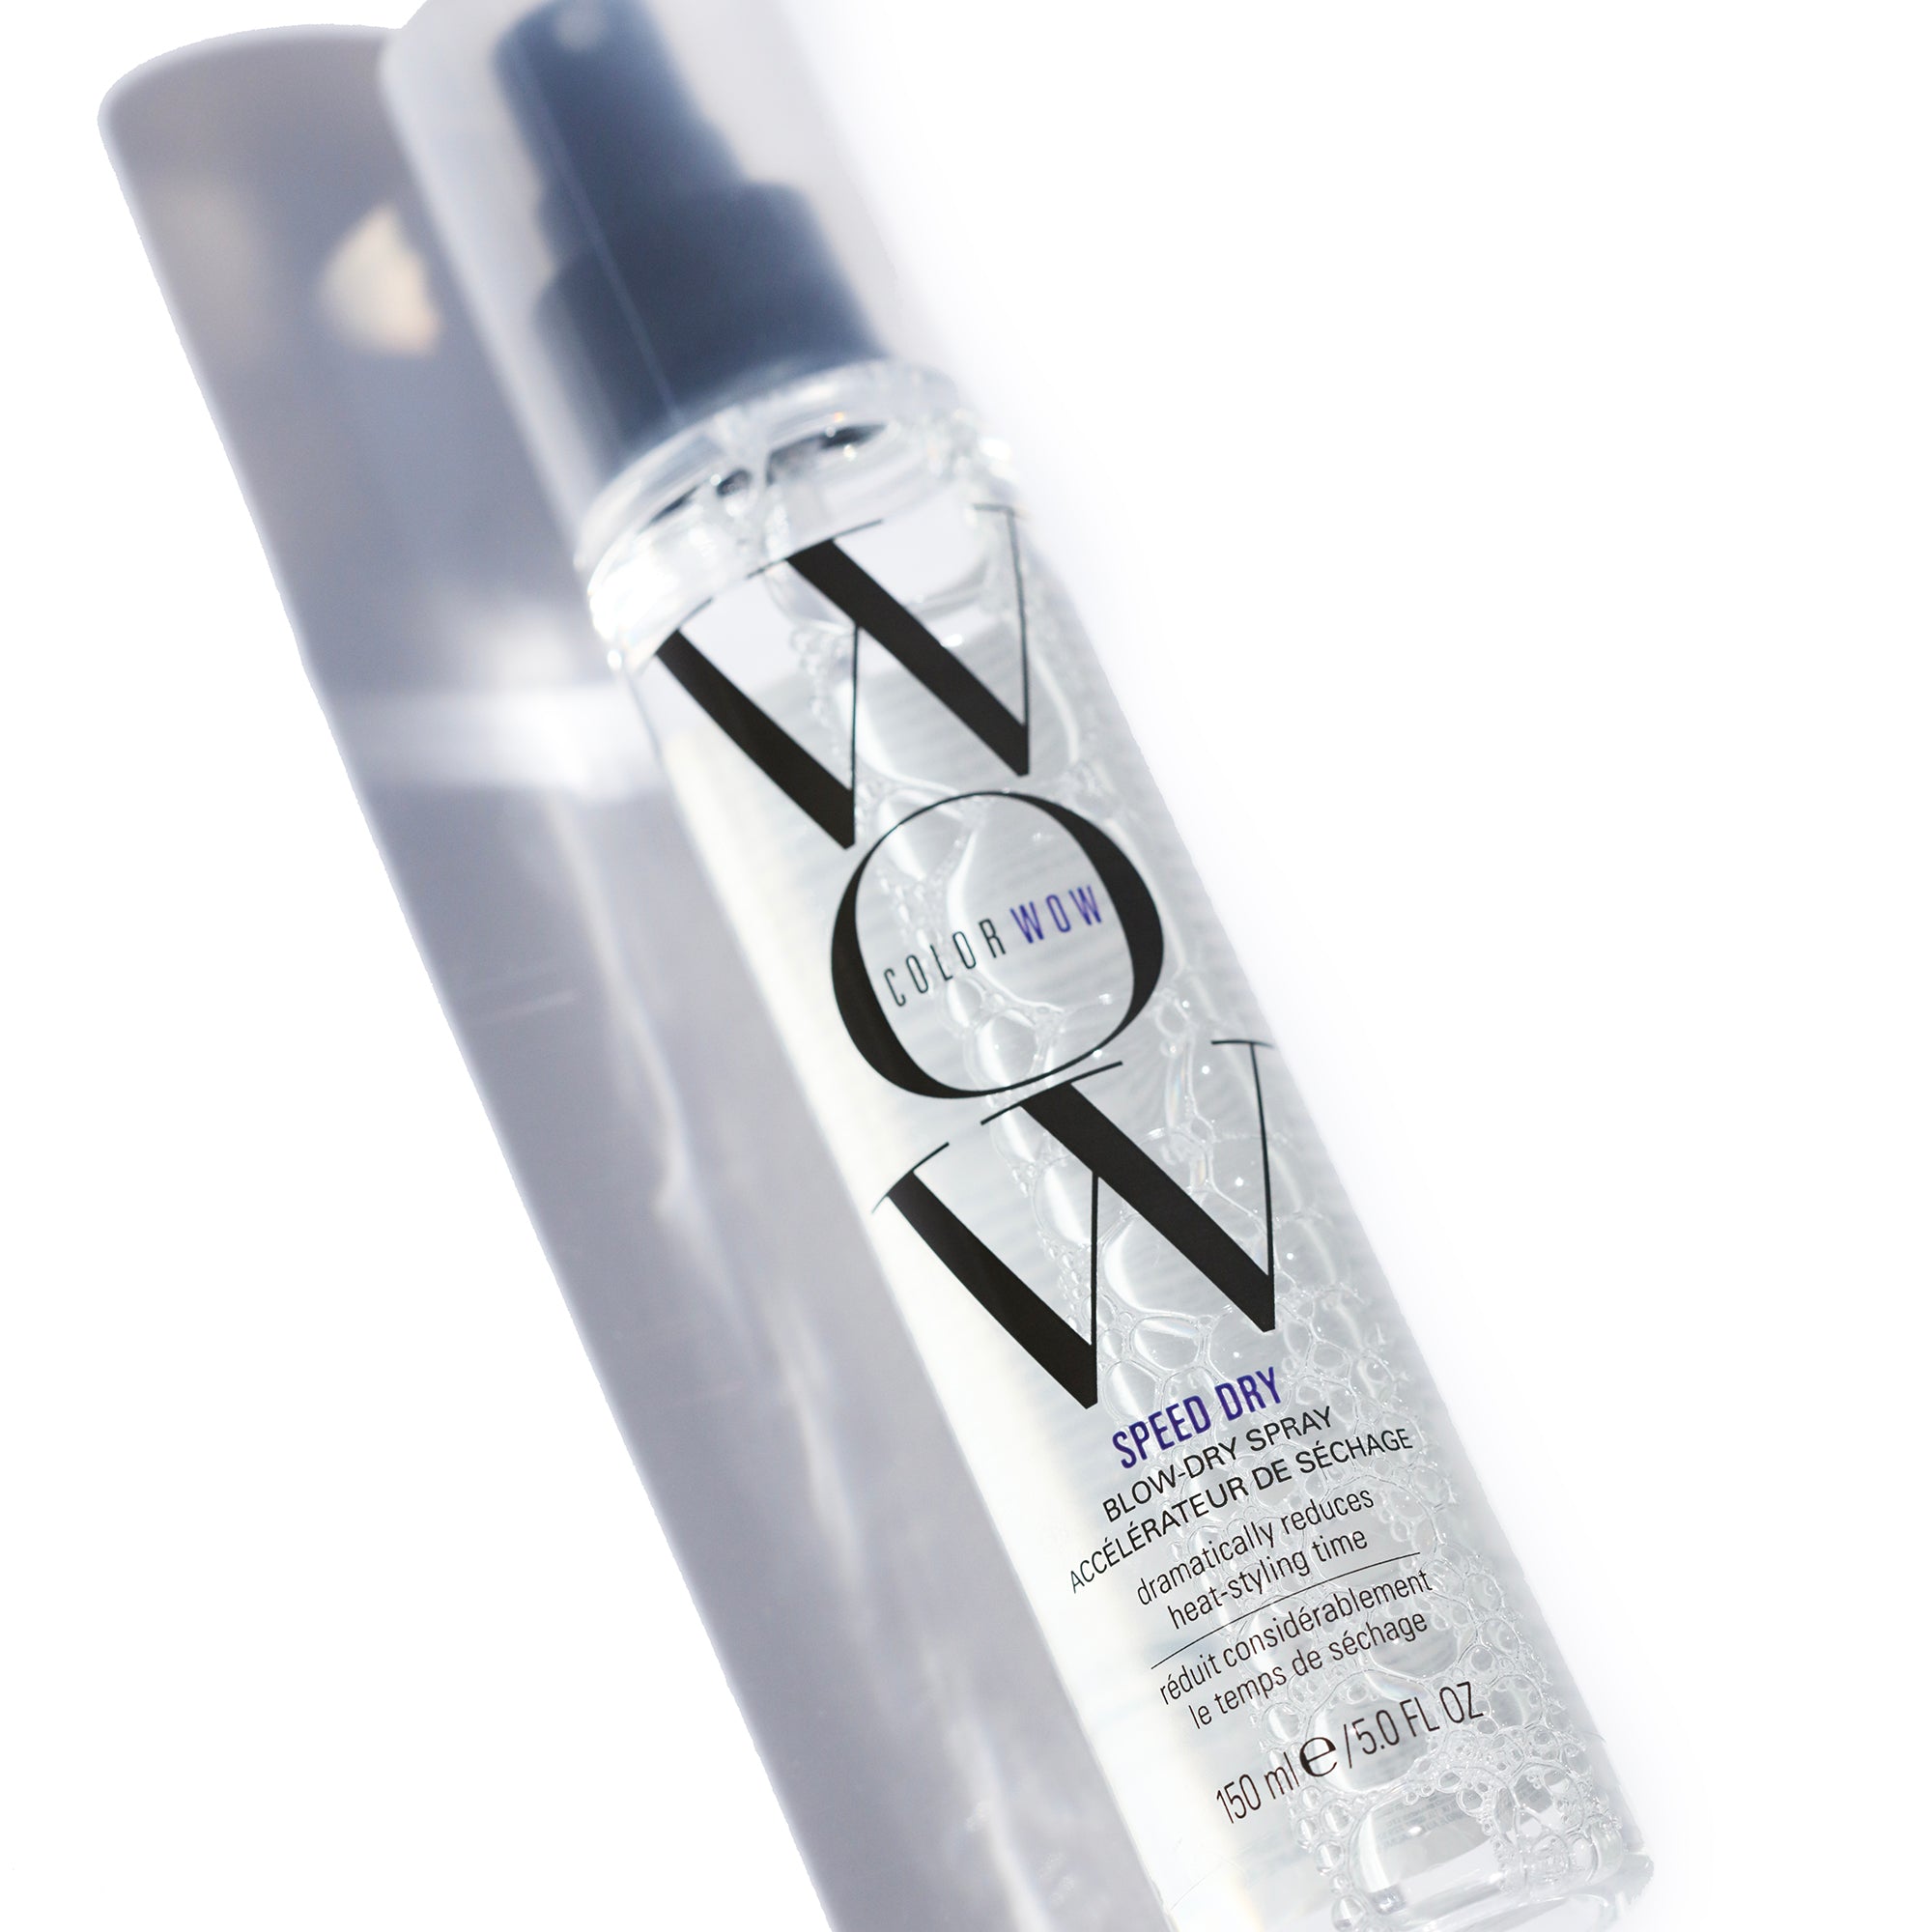  COLOR WOW Speed Dry Spray - Cut Blow Dry Time 30%, Heat  Protectant, Prevent Breakage